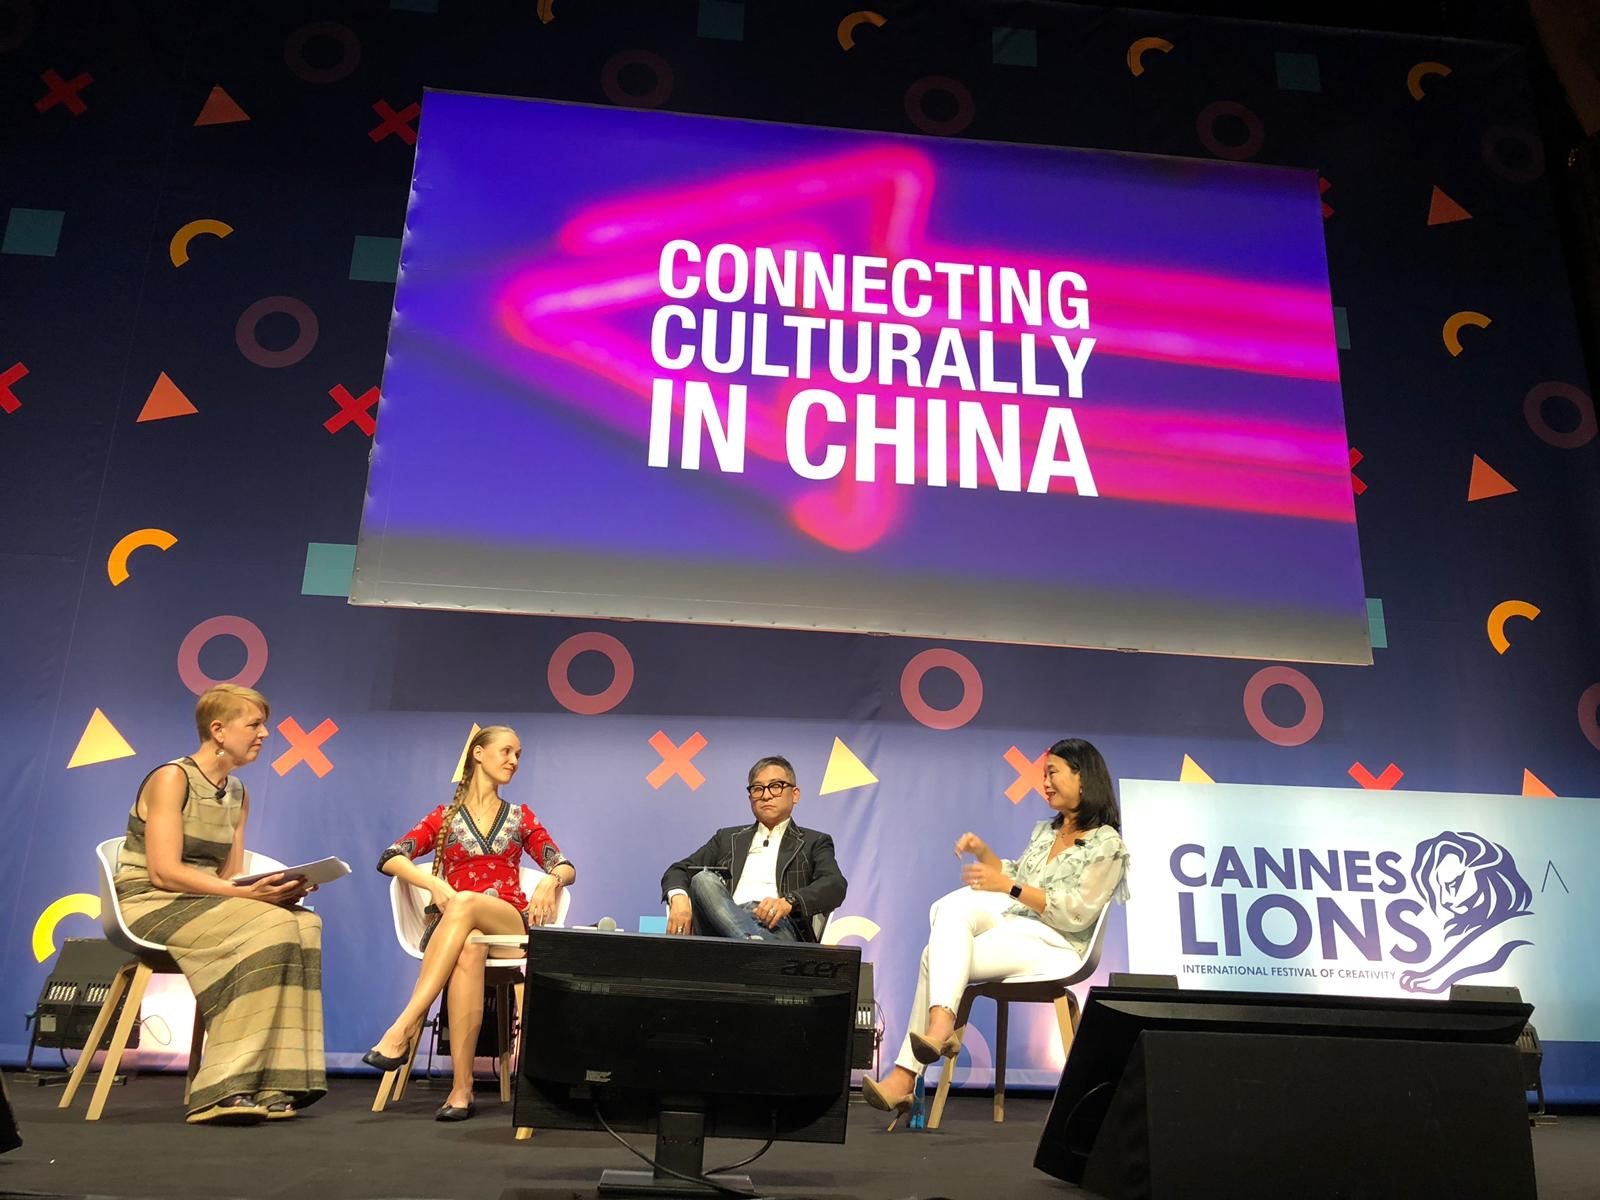 Our own Rachel Catanach led Connecting Culturally in China panel at Cannes International Festival of Creativity.